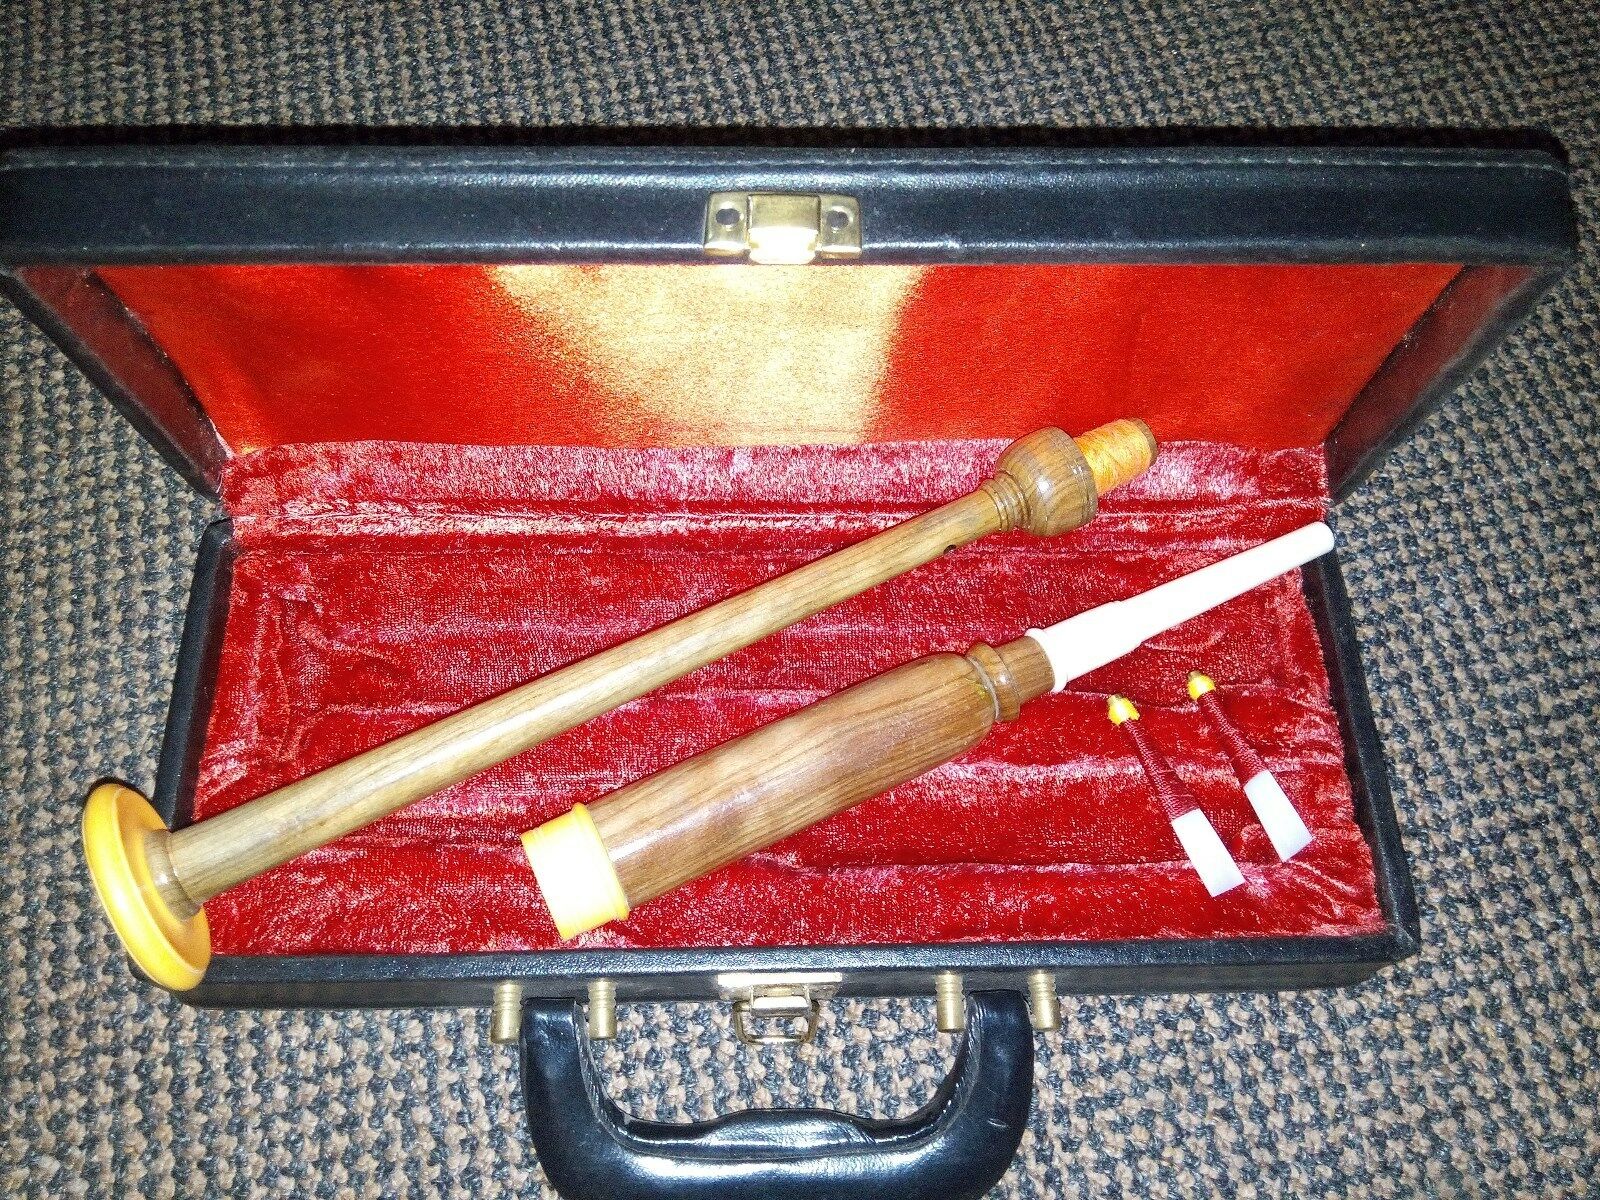 Practice Chanter  Cocus Wood  With  Real Imm Ivory.  Over 30 Years Old.